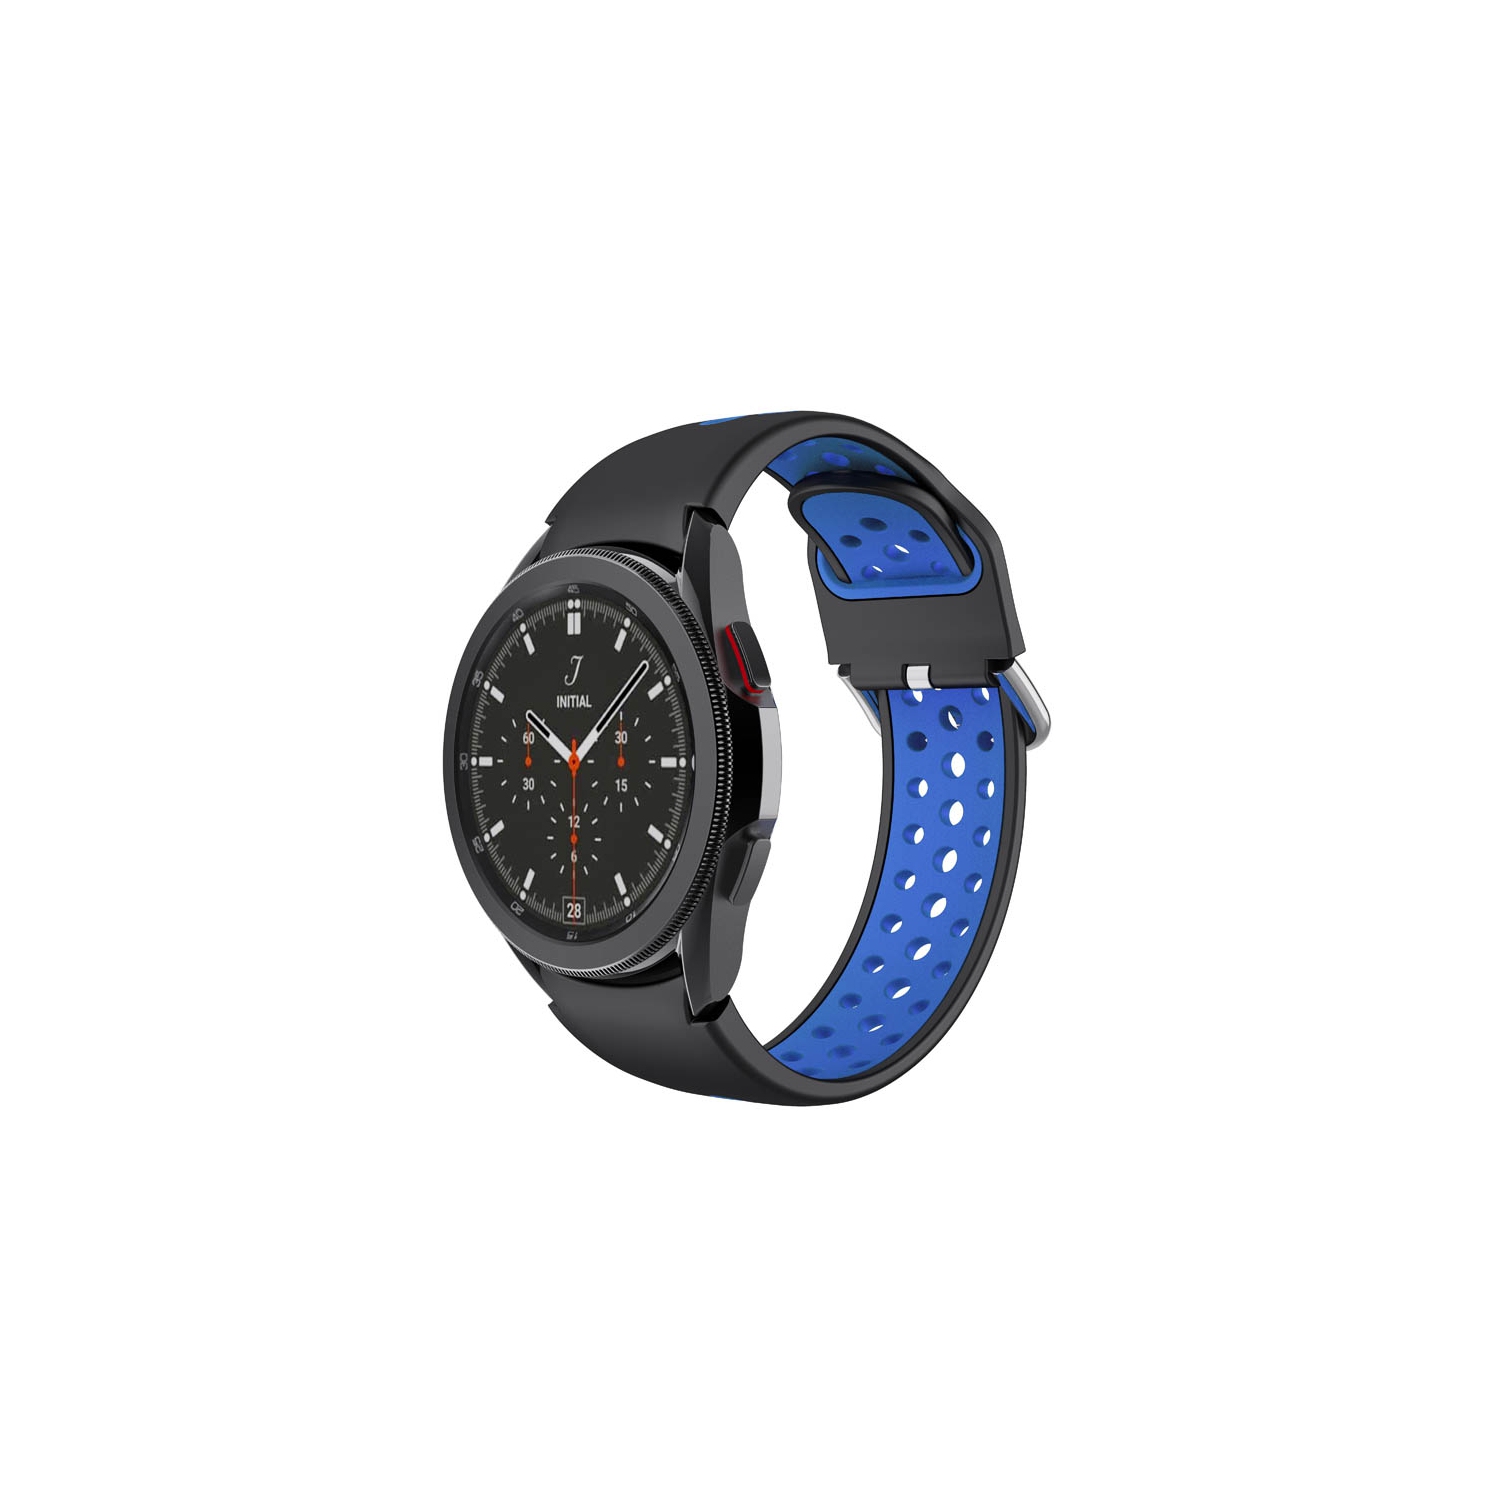 StrapsCo Perforated Soft Silicone Rubber Strap Band for Samsung Galaxy Watch 4 - Short-Medium - Black & Blue